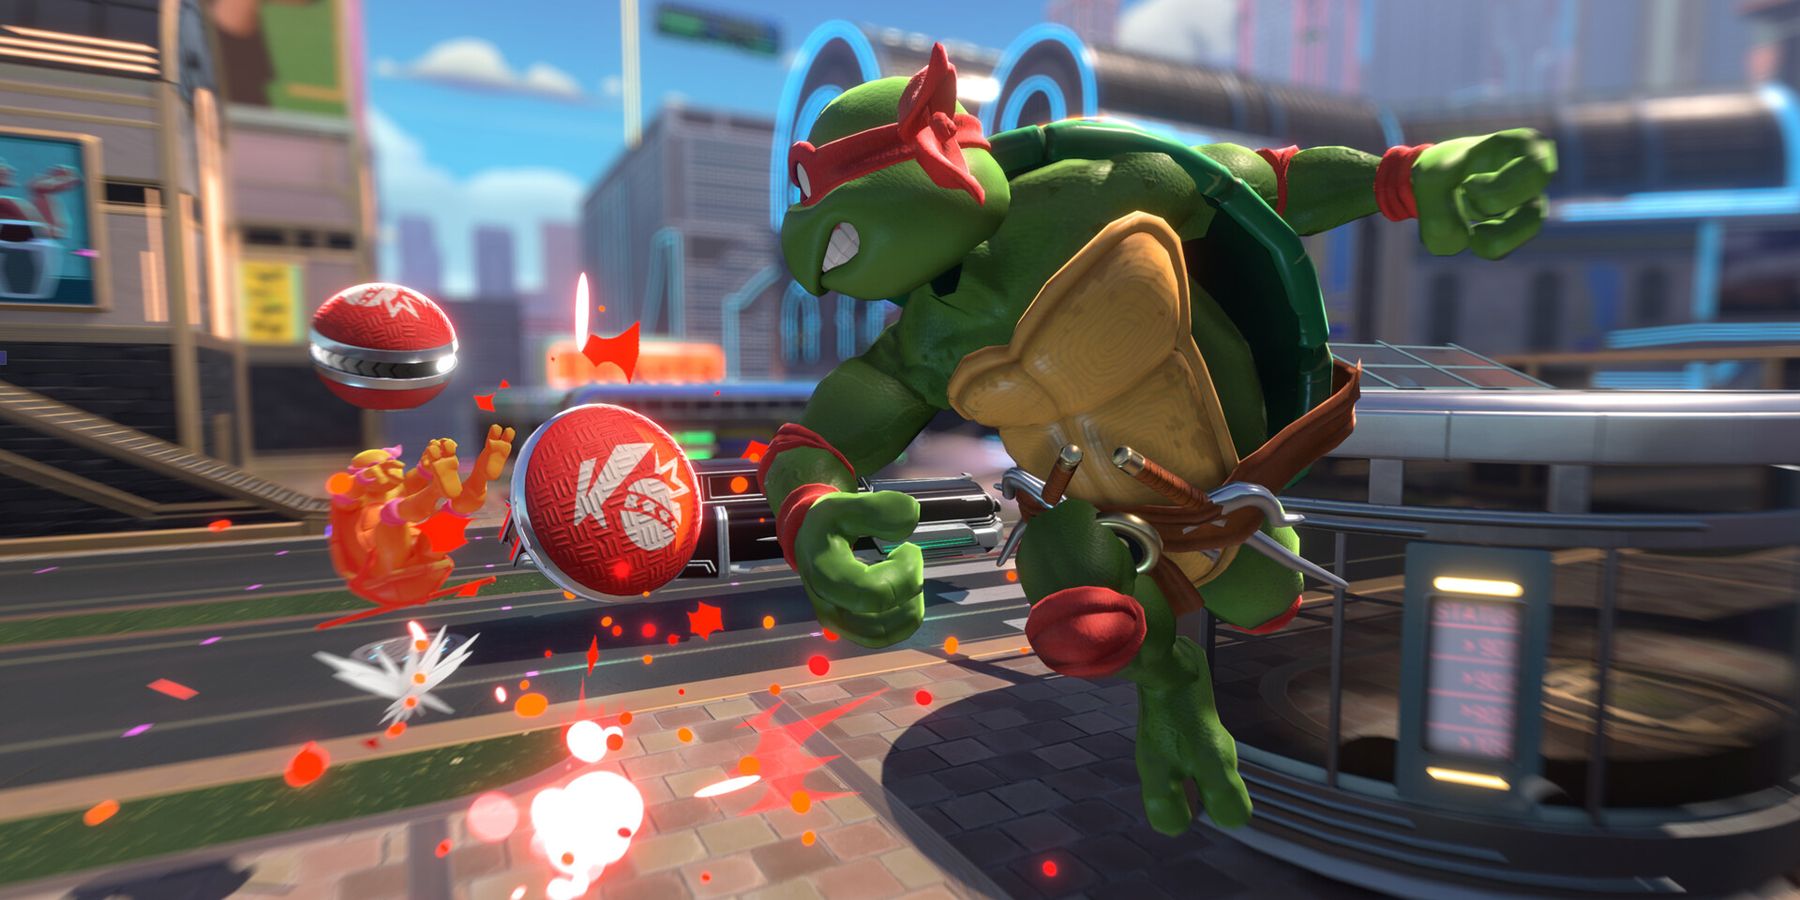 Teenage Mutant Ninja Turtles Are In Knockout City! - Gameplay (PC), @